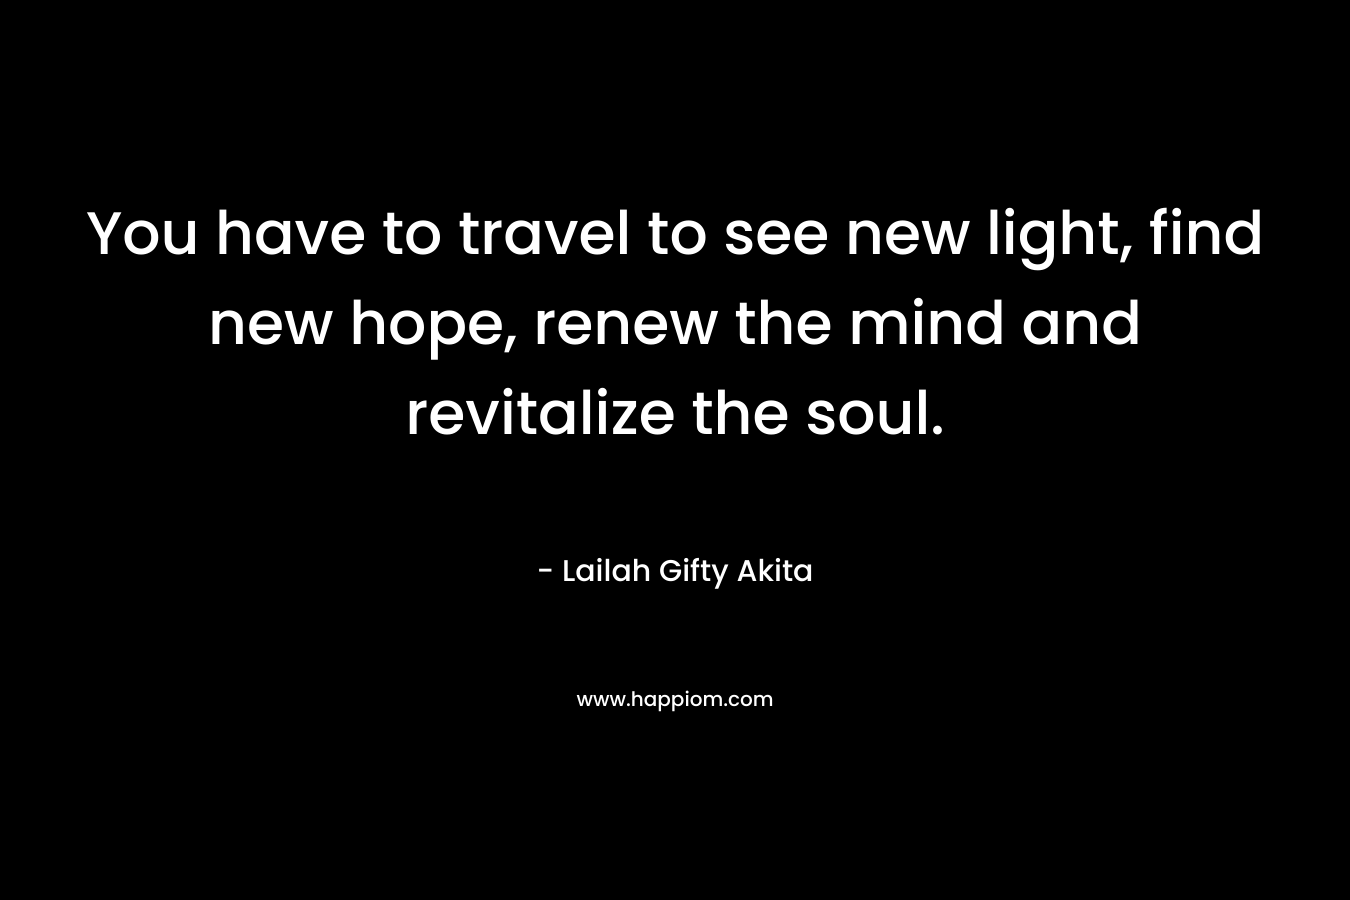 You have to travel to see new light, find new hope, renew the mind and revitalize the soul. – Lailah Gifty Akita